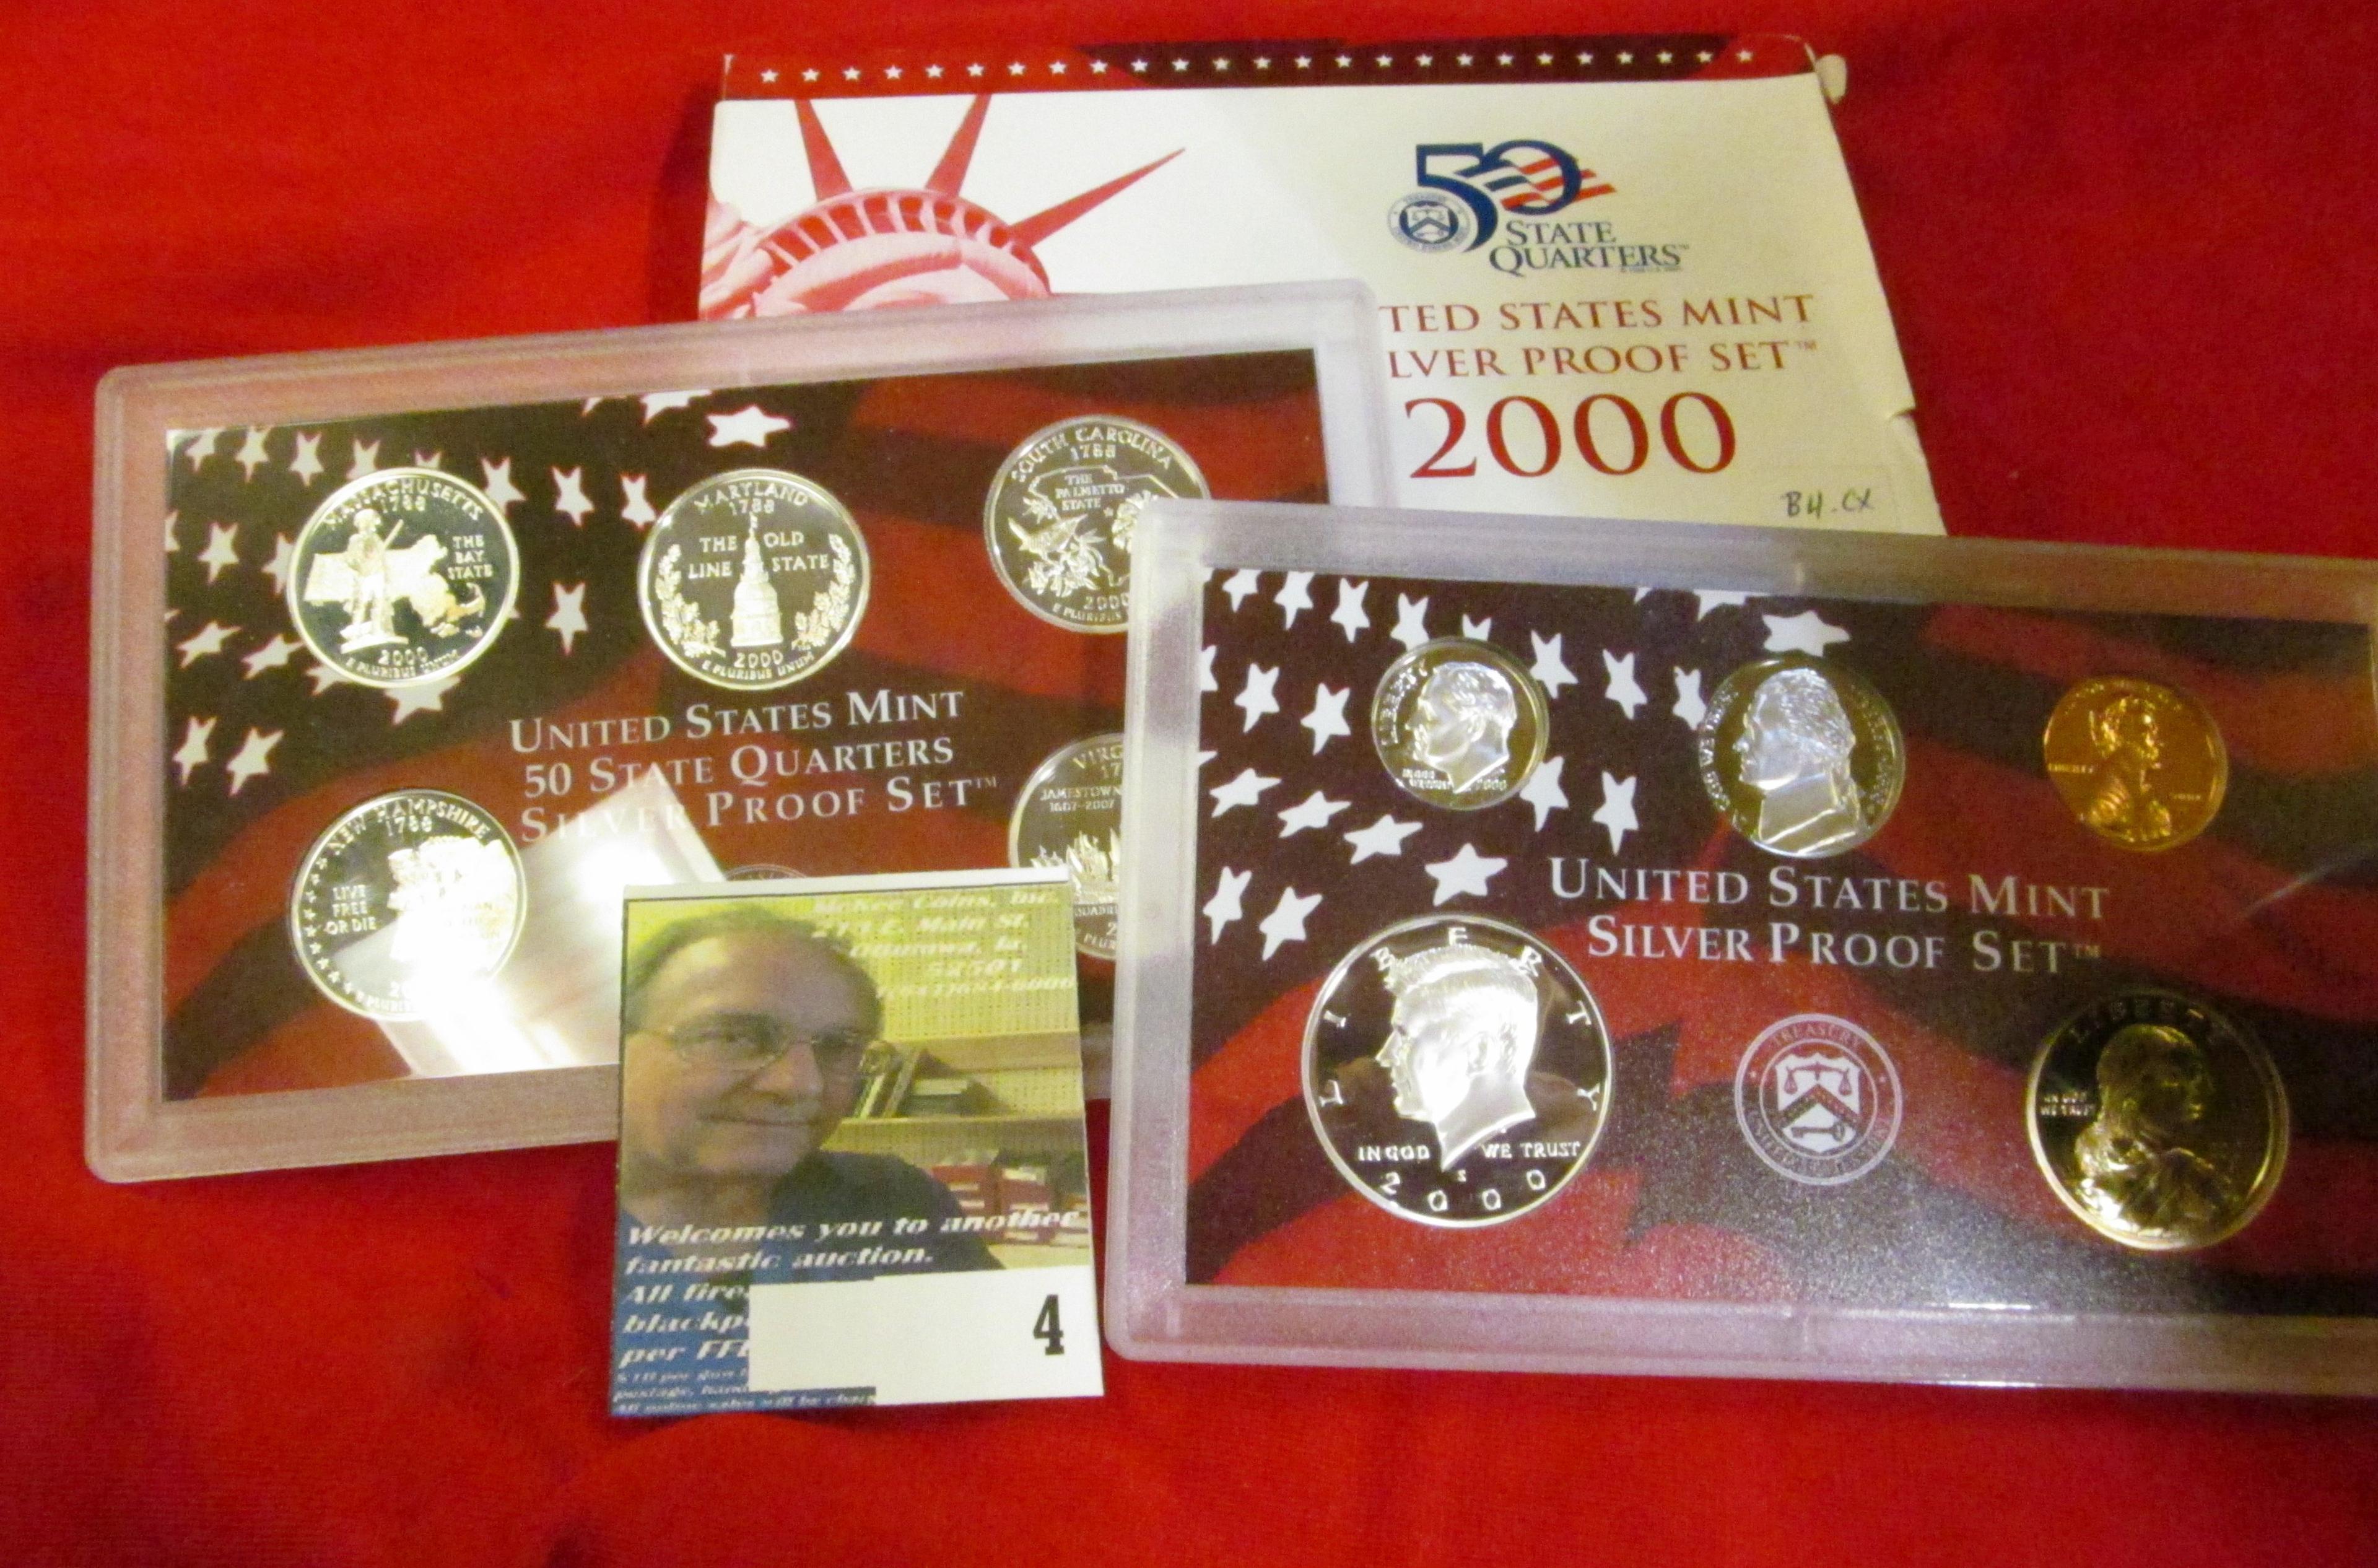 2000 S U.S. Silver Proof Set. 10 pc. In original government issued box and case.